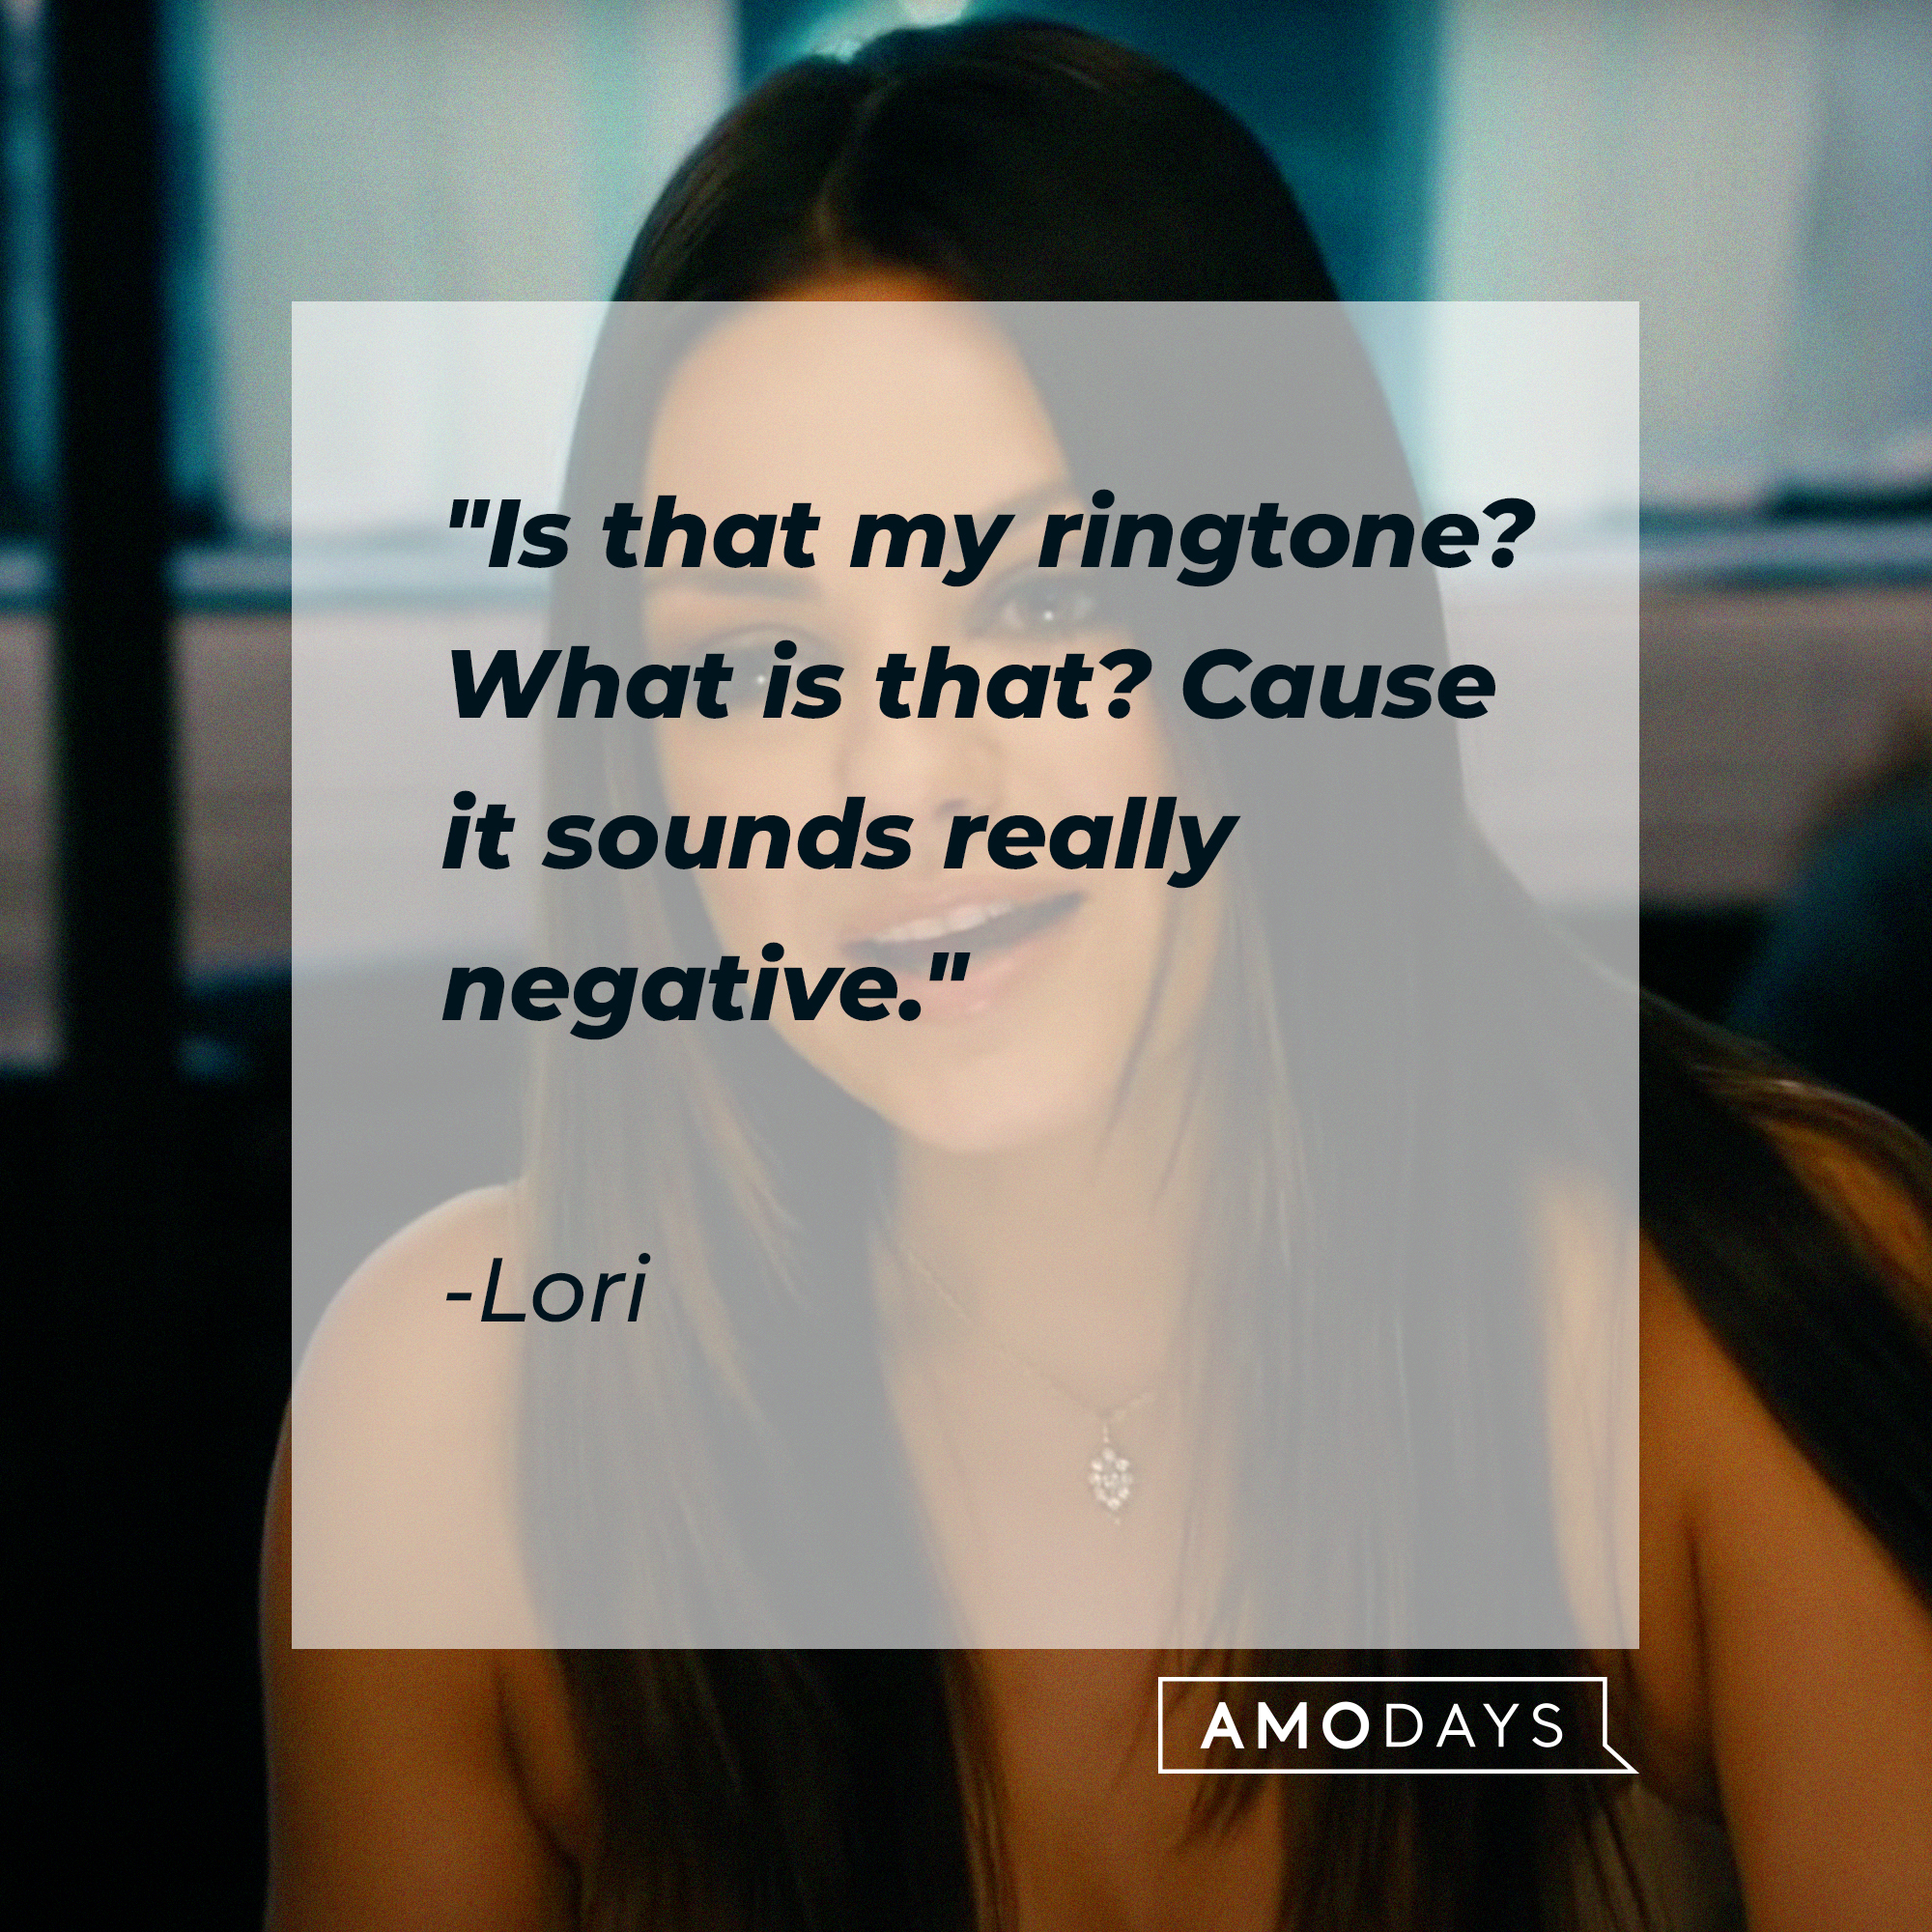 Lori's quote: "Is that my ringtone? What is that? Cause it sounds really negative." | Source: facebook.com/tedisreal